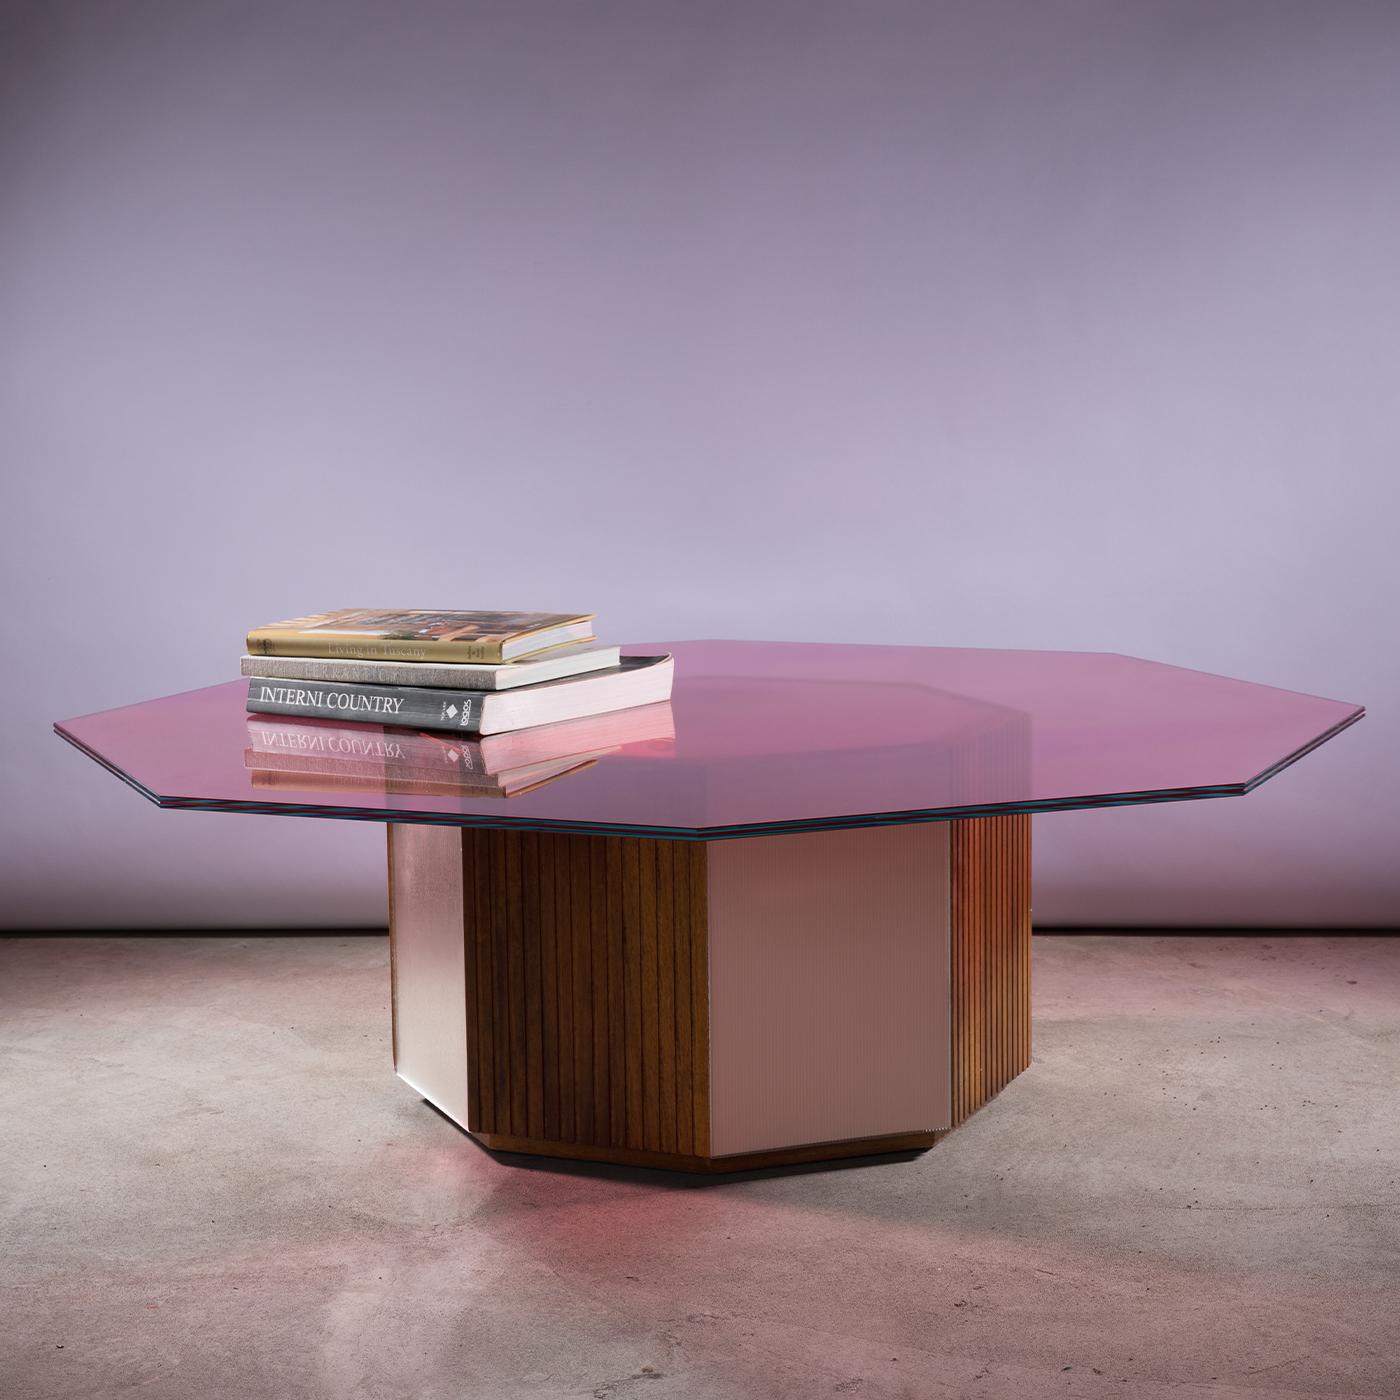 An amusing play on counterparts, Sandra e Raimondo is a tribute to a famous TV comedy couple from the 20th century. Featuring a regular octagon base with alternate panels of pink glass and slatted Iroko wood, along with a pink, mirrored-glass,